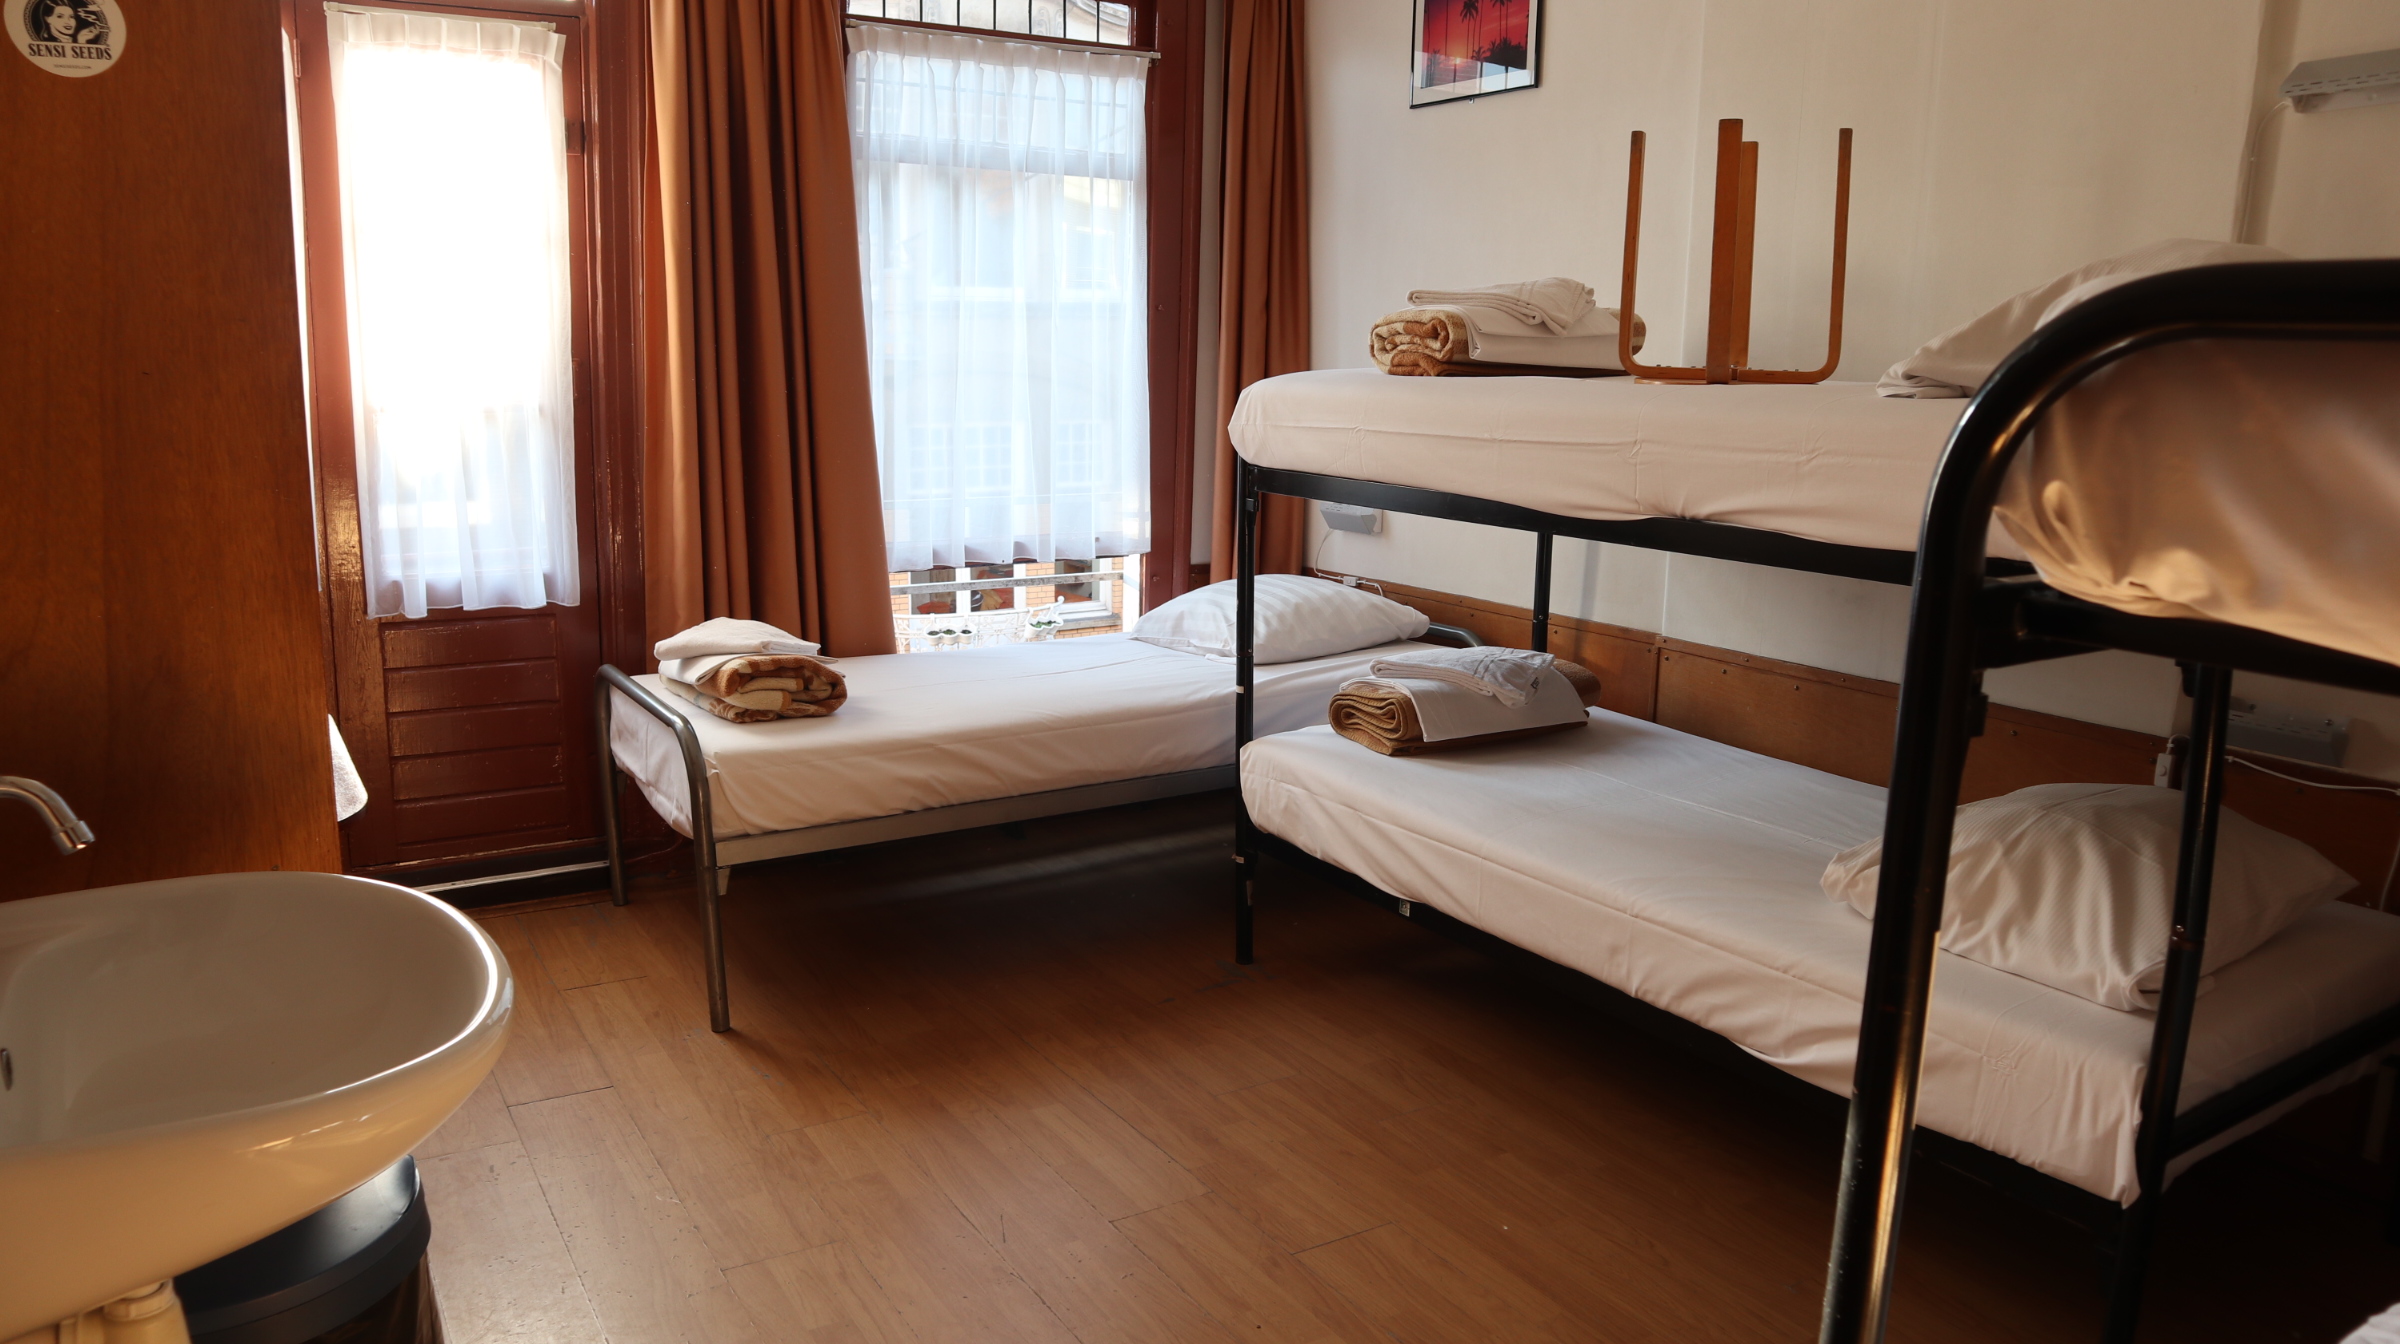 Amsterdam Budget hotel - 5 beds room